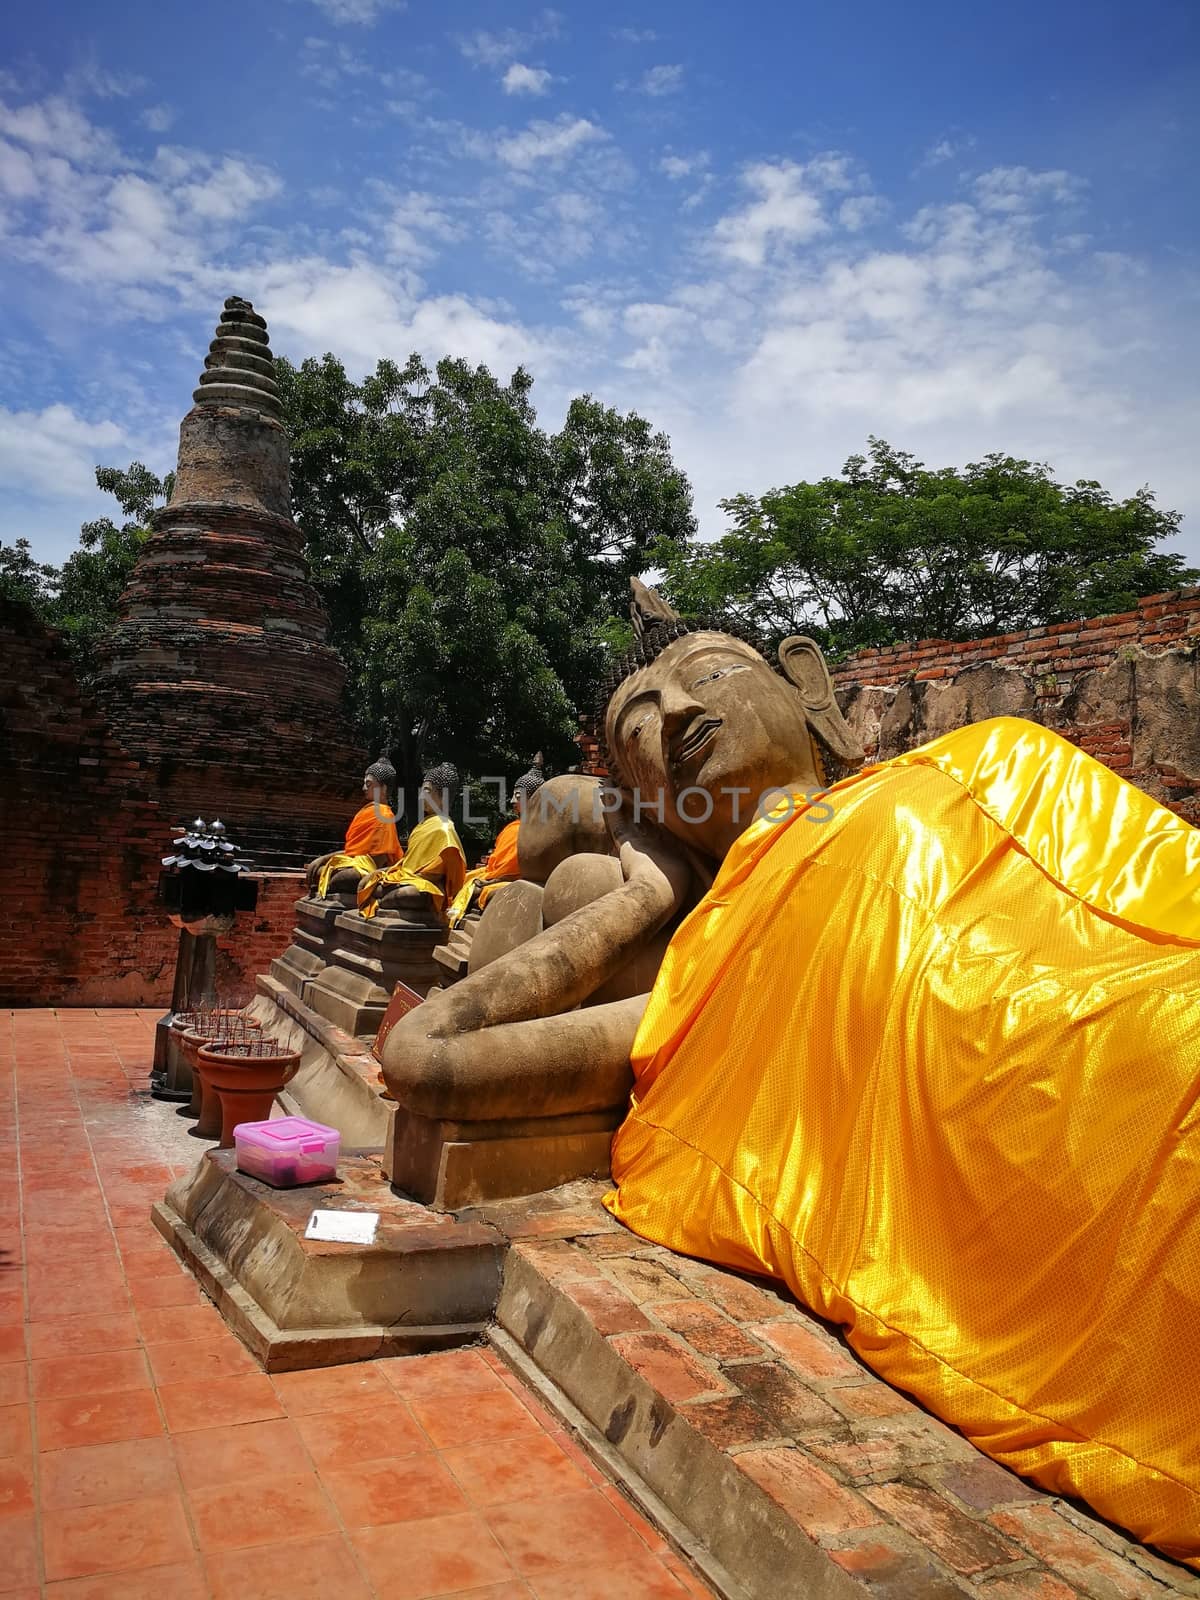 Thailand text mean Warning travelers Do not climb .The bigger Reclining Buddha in Thailand Temples at "Ayutthaya" Province that Historical Attractions.

